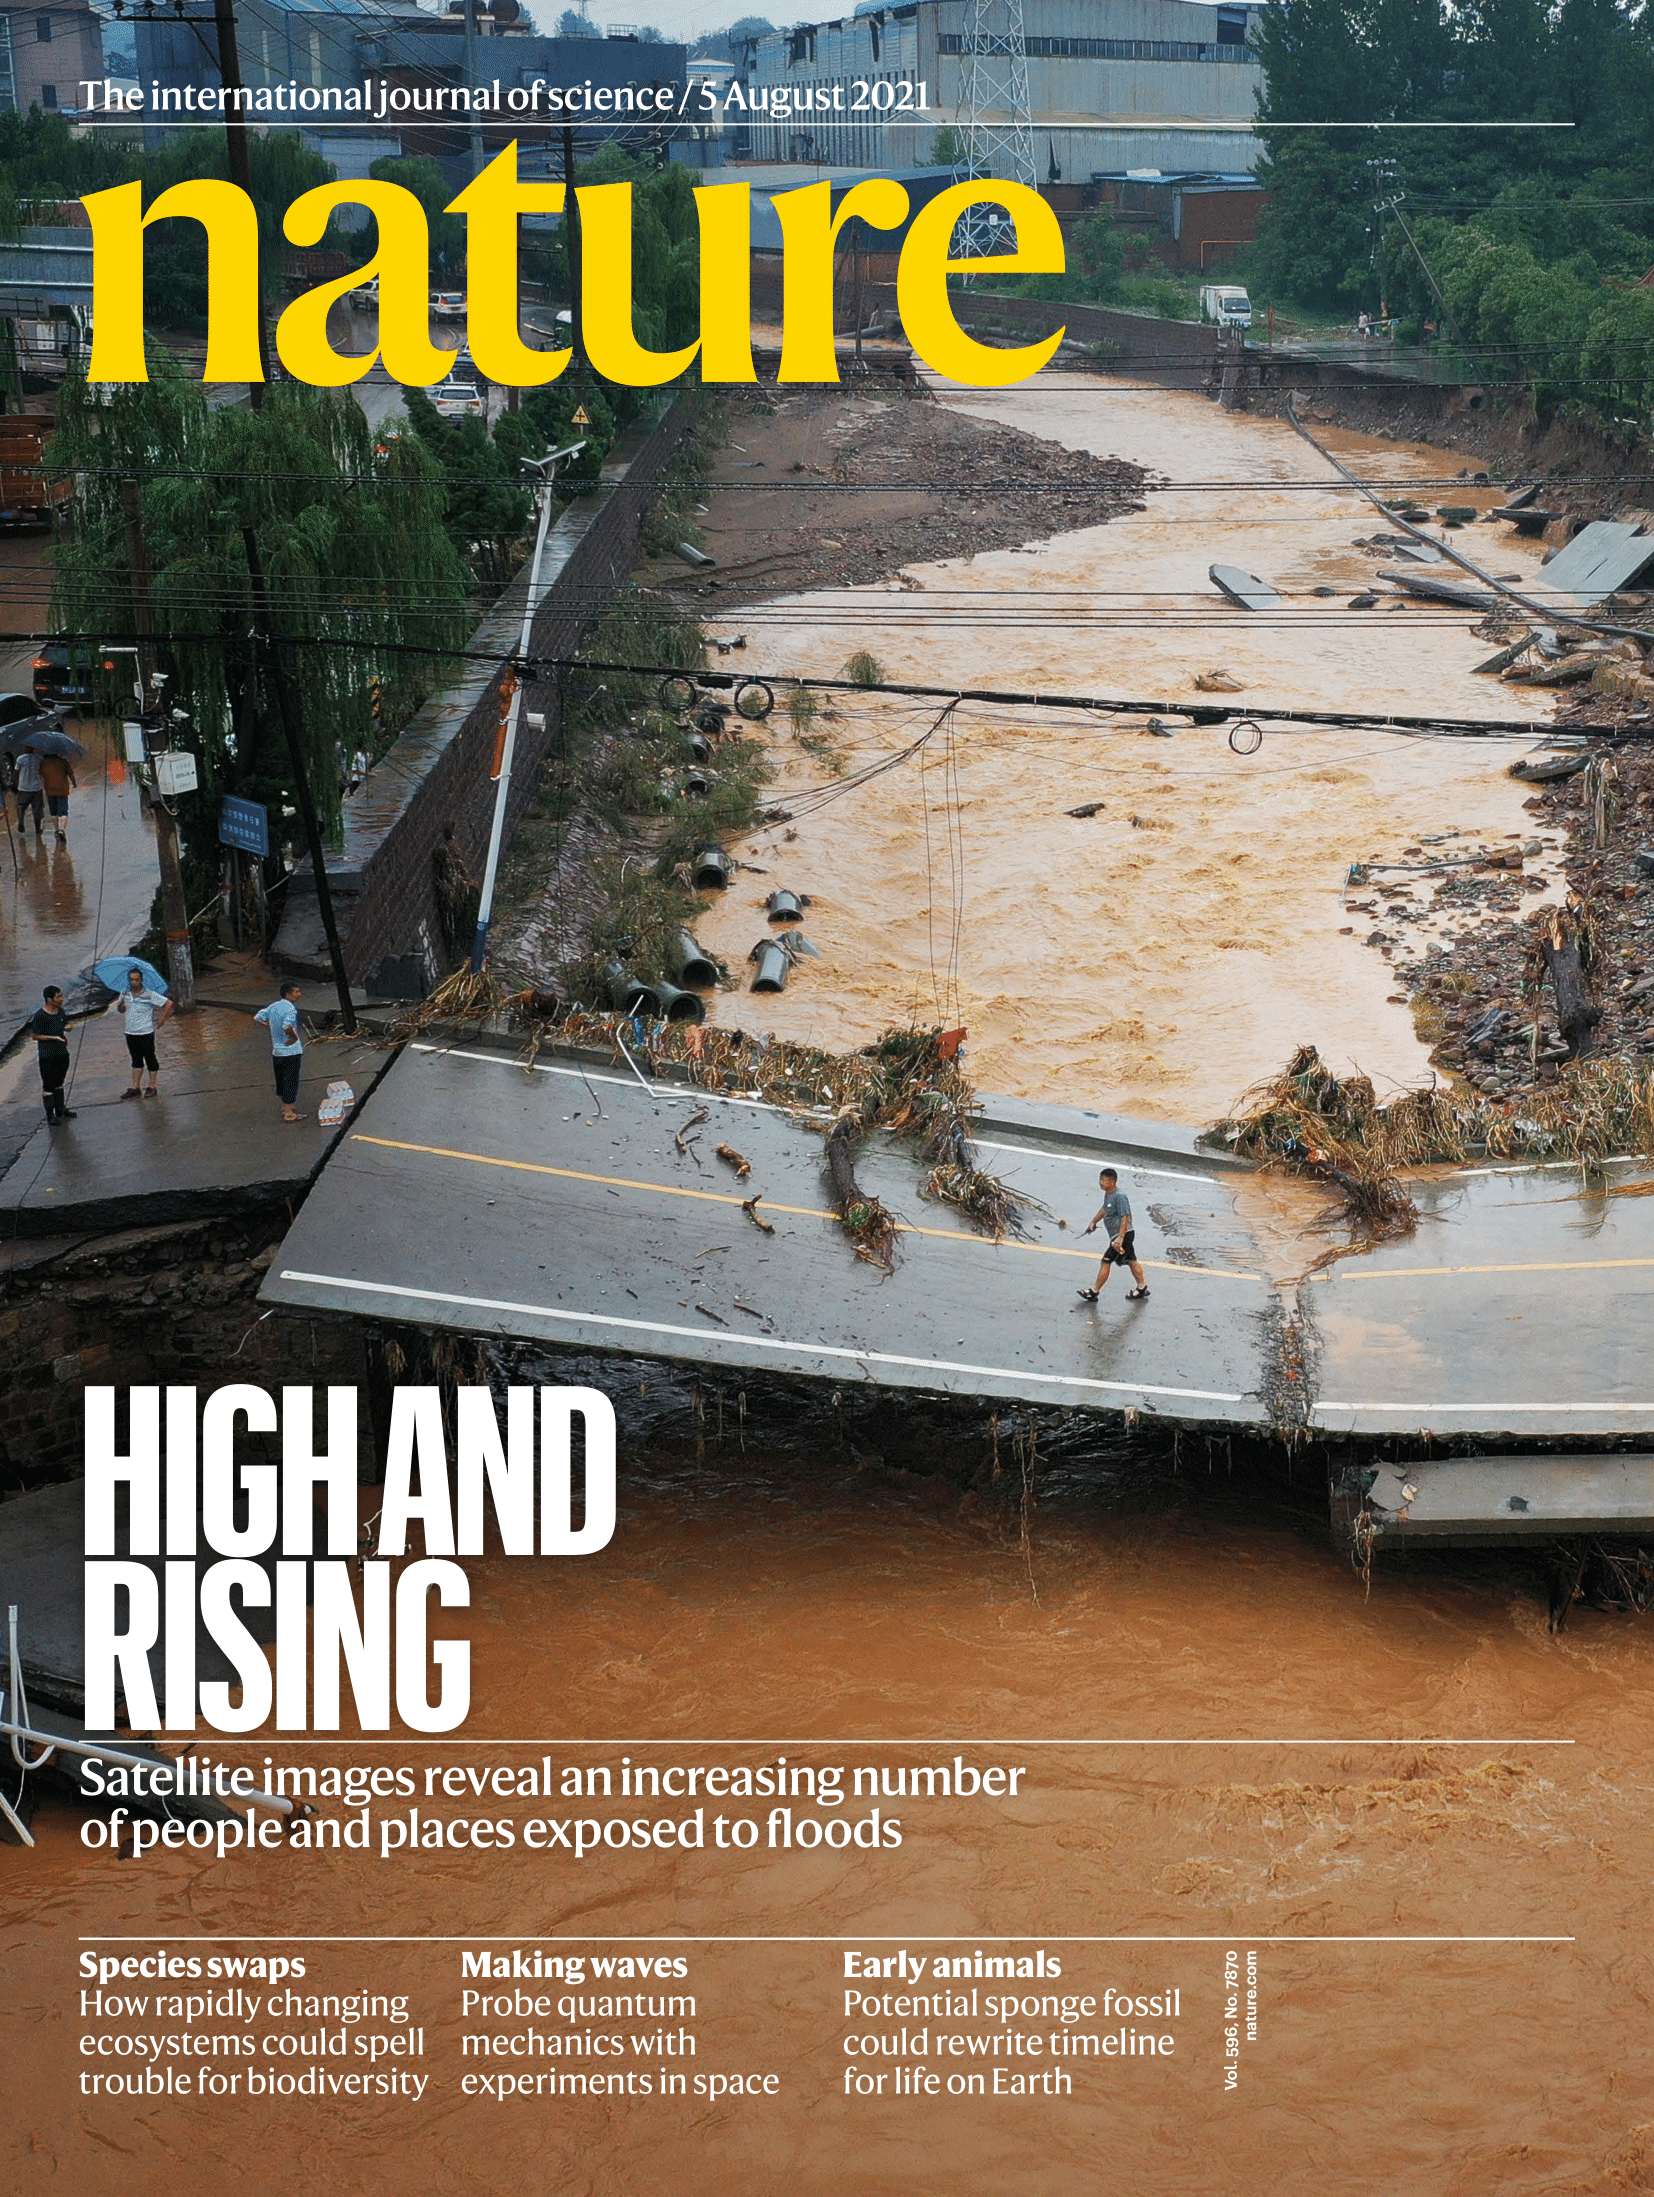 A flooded street on the cover of Nature magazine